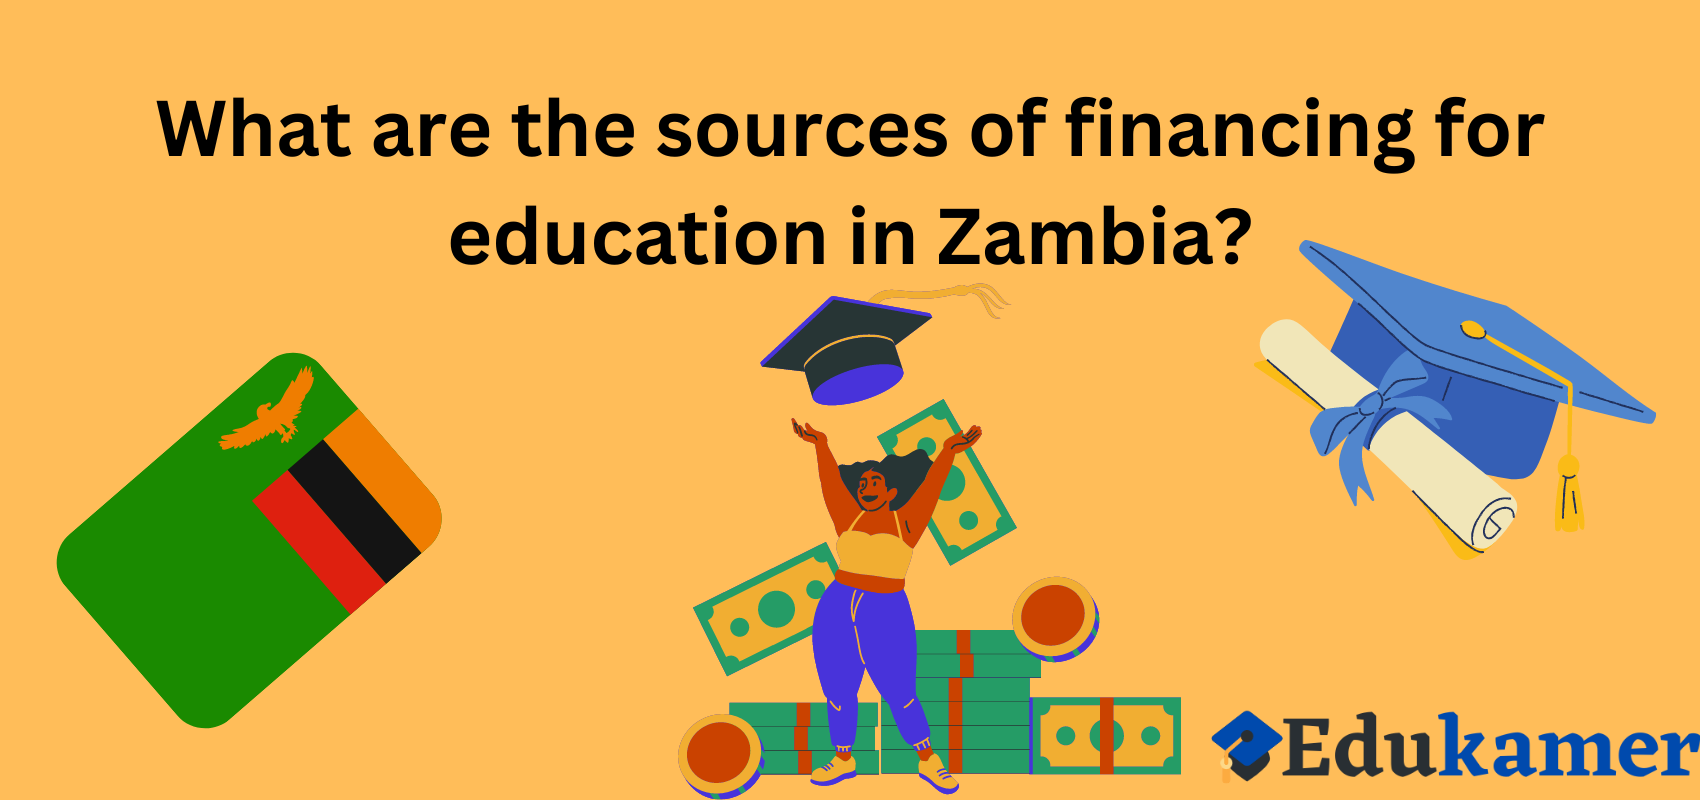 sources of financing for education in Zambia